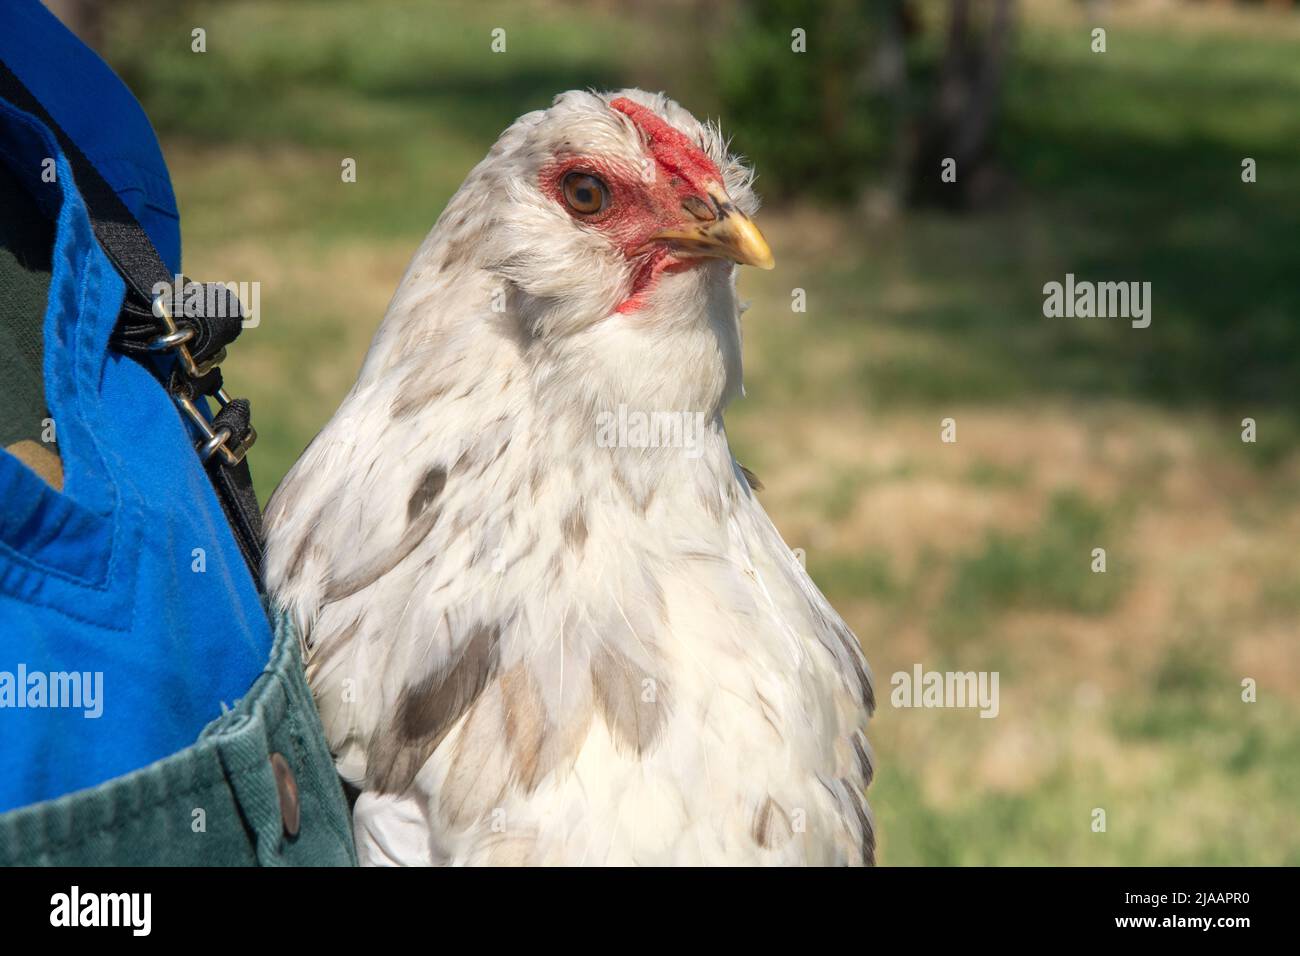 Farmer in overalls holding mixed breed chicken with white feathers Stock Photo